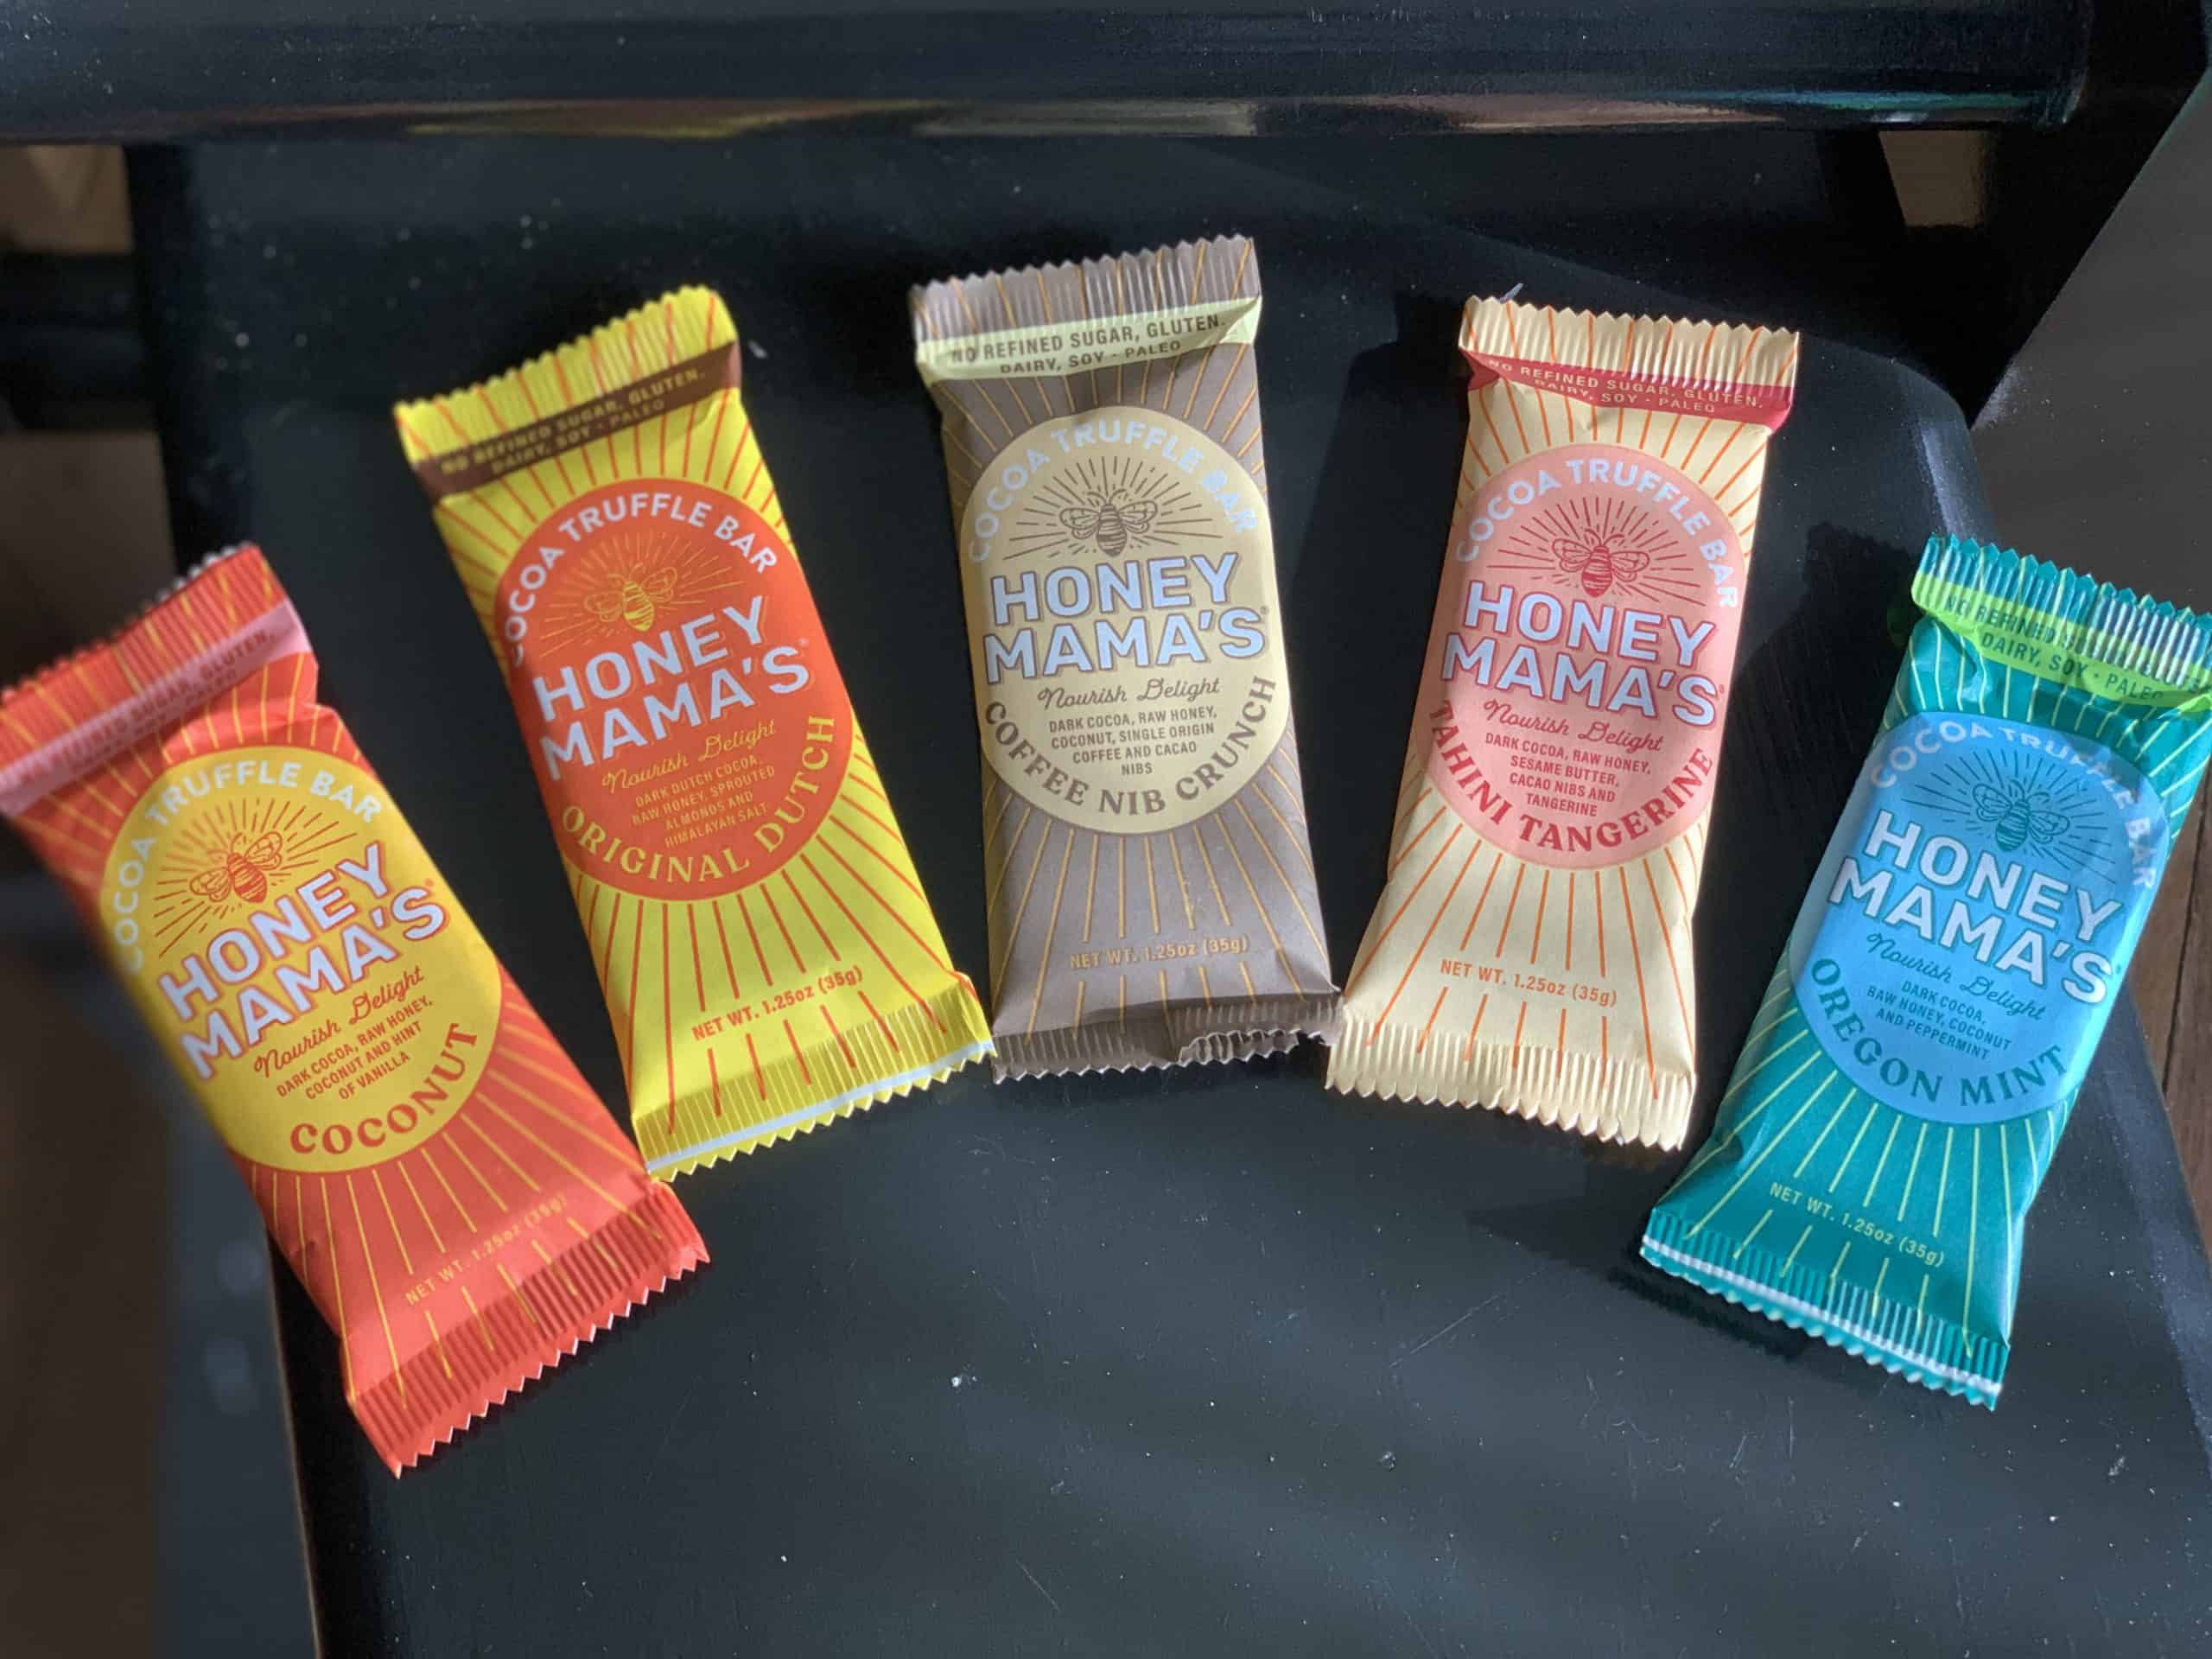 things to make your life easier in 2022 - honey mama's coco bars